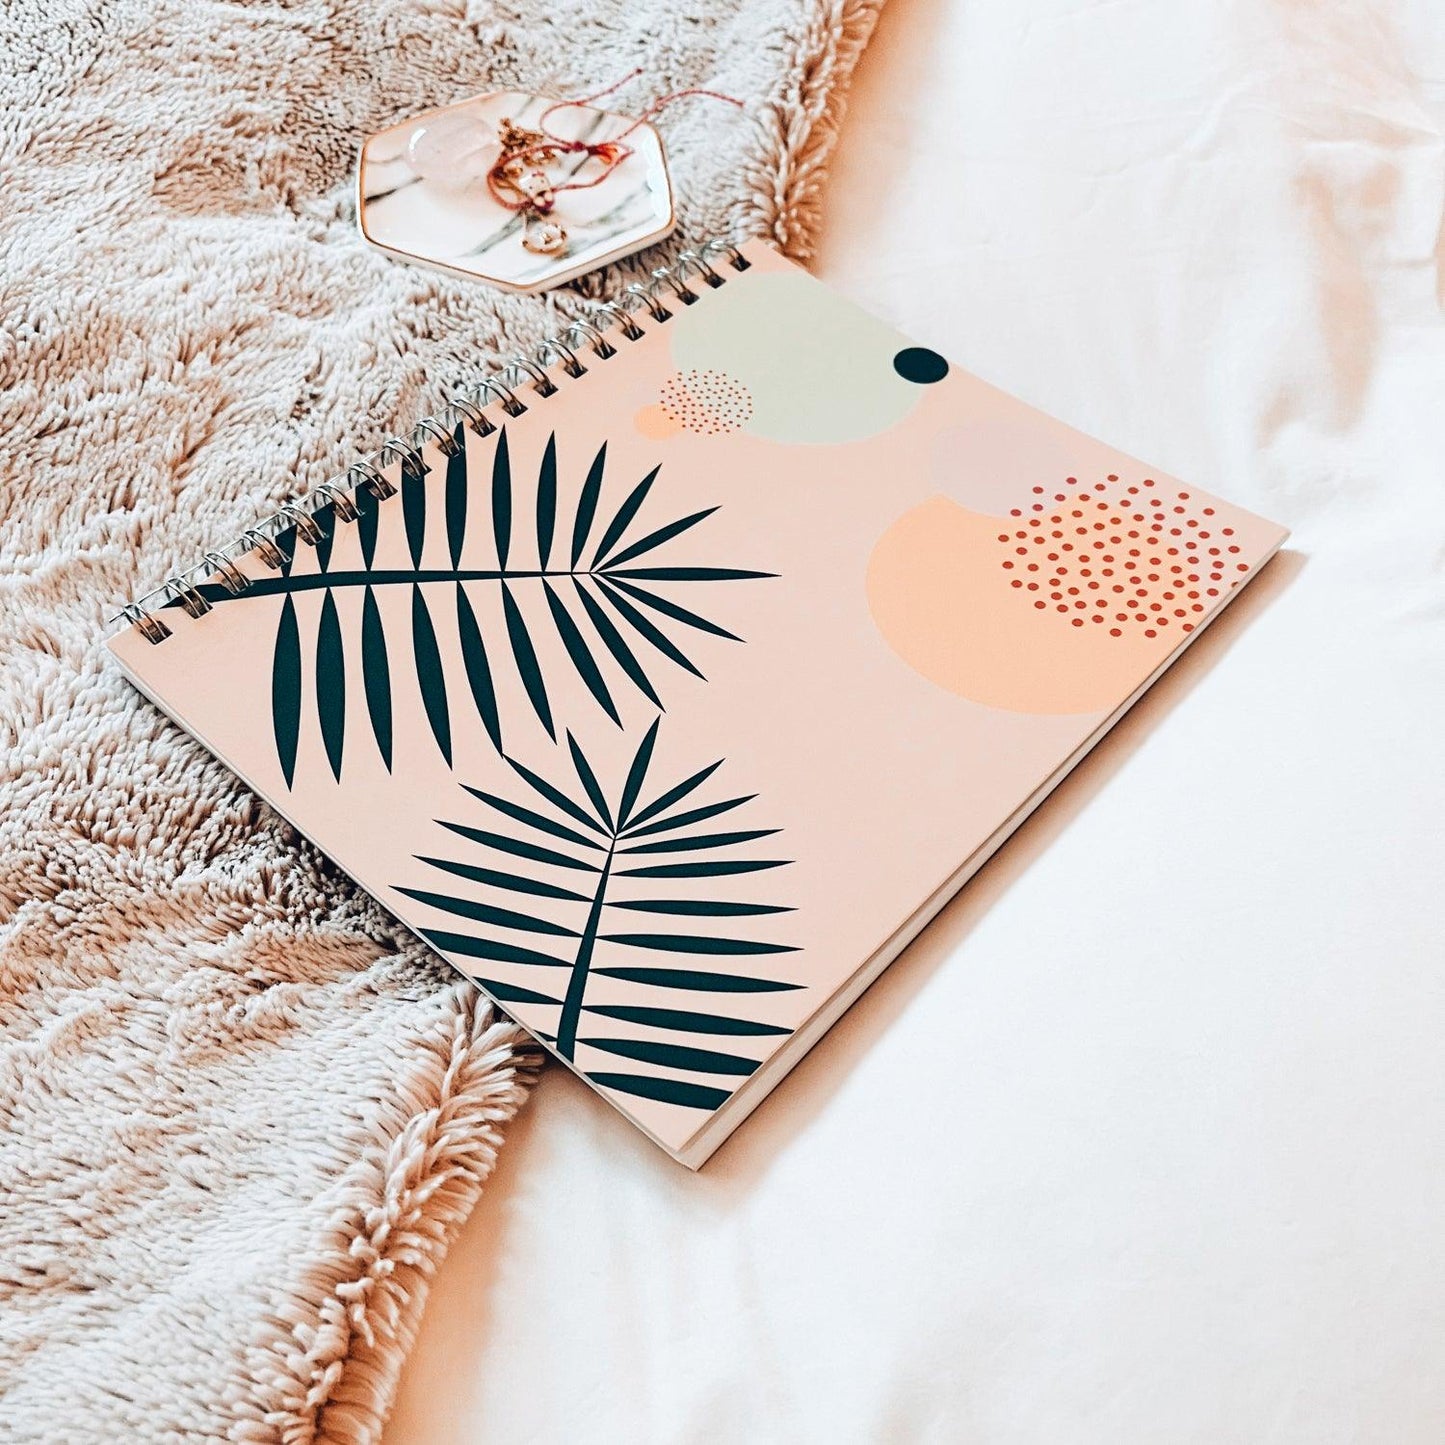 Cool and calm journal flat lay on bed